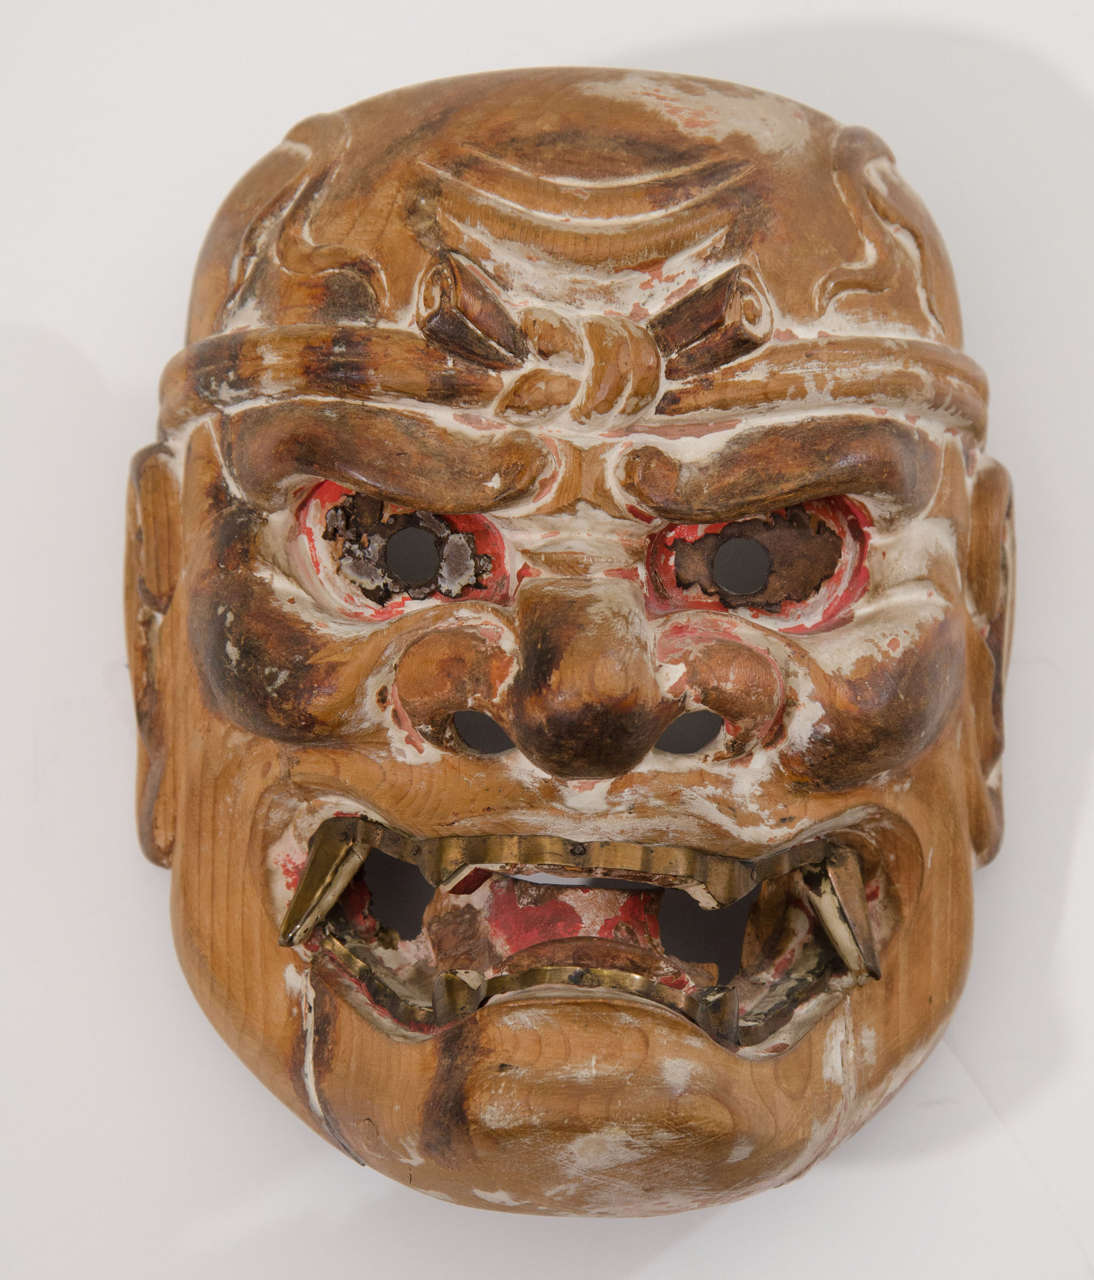 A powerful and rare Japanese Edo Period Kyogen mask of a Nio Guardian King; ferocious native deities often associated with the Naga Dragon Kings, who converted to Buddhism and now act as bodyguards for the Buddha.  The Edo period was the golden age